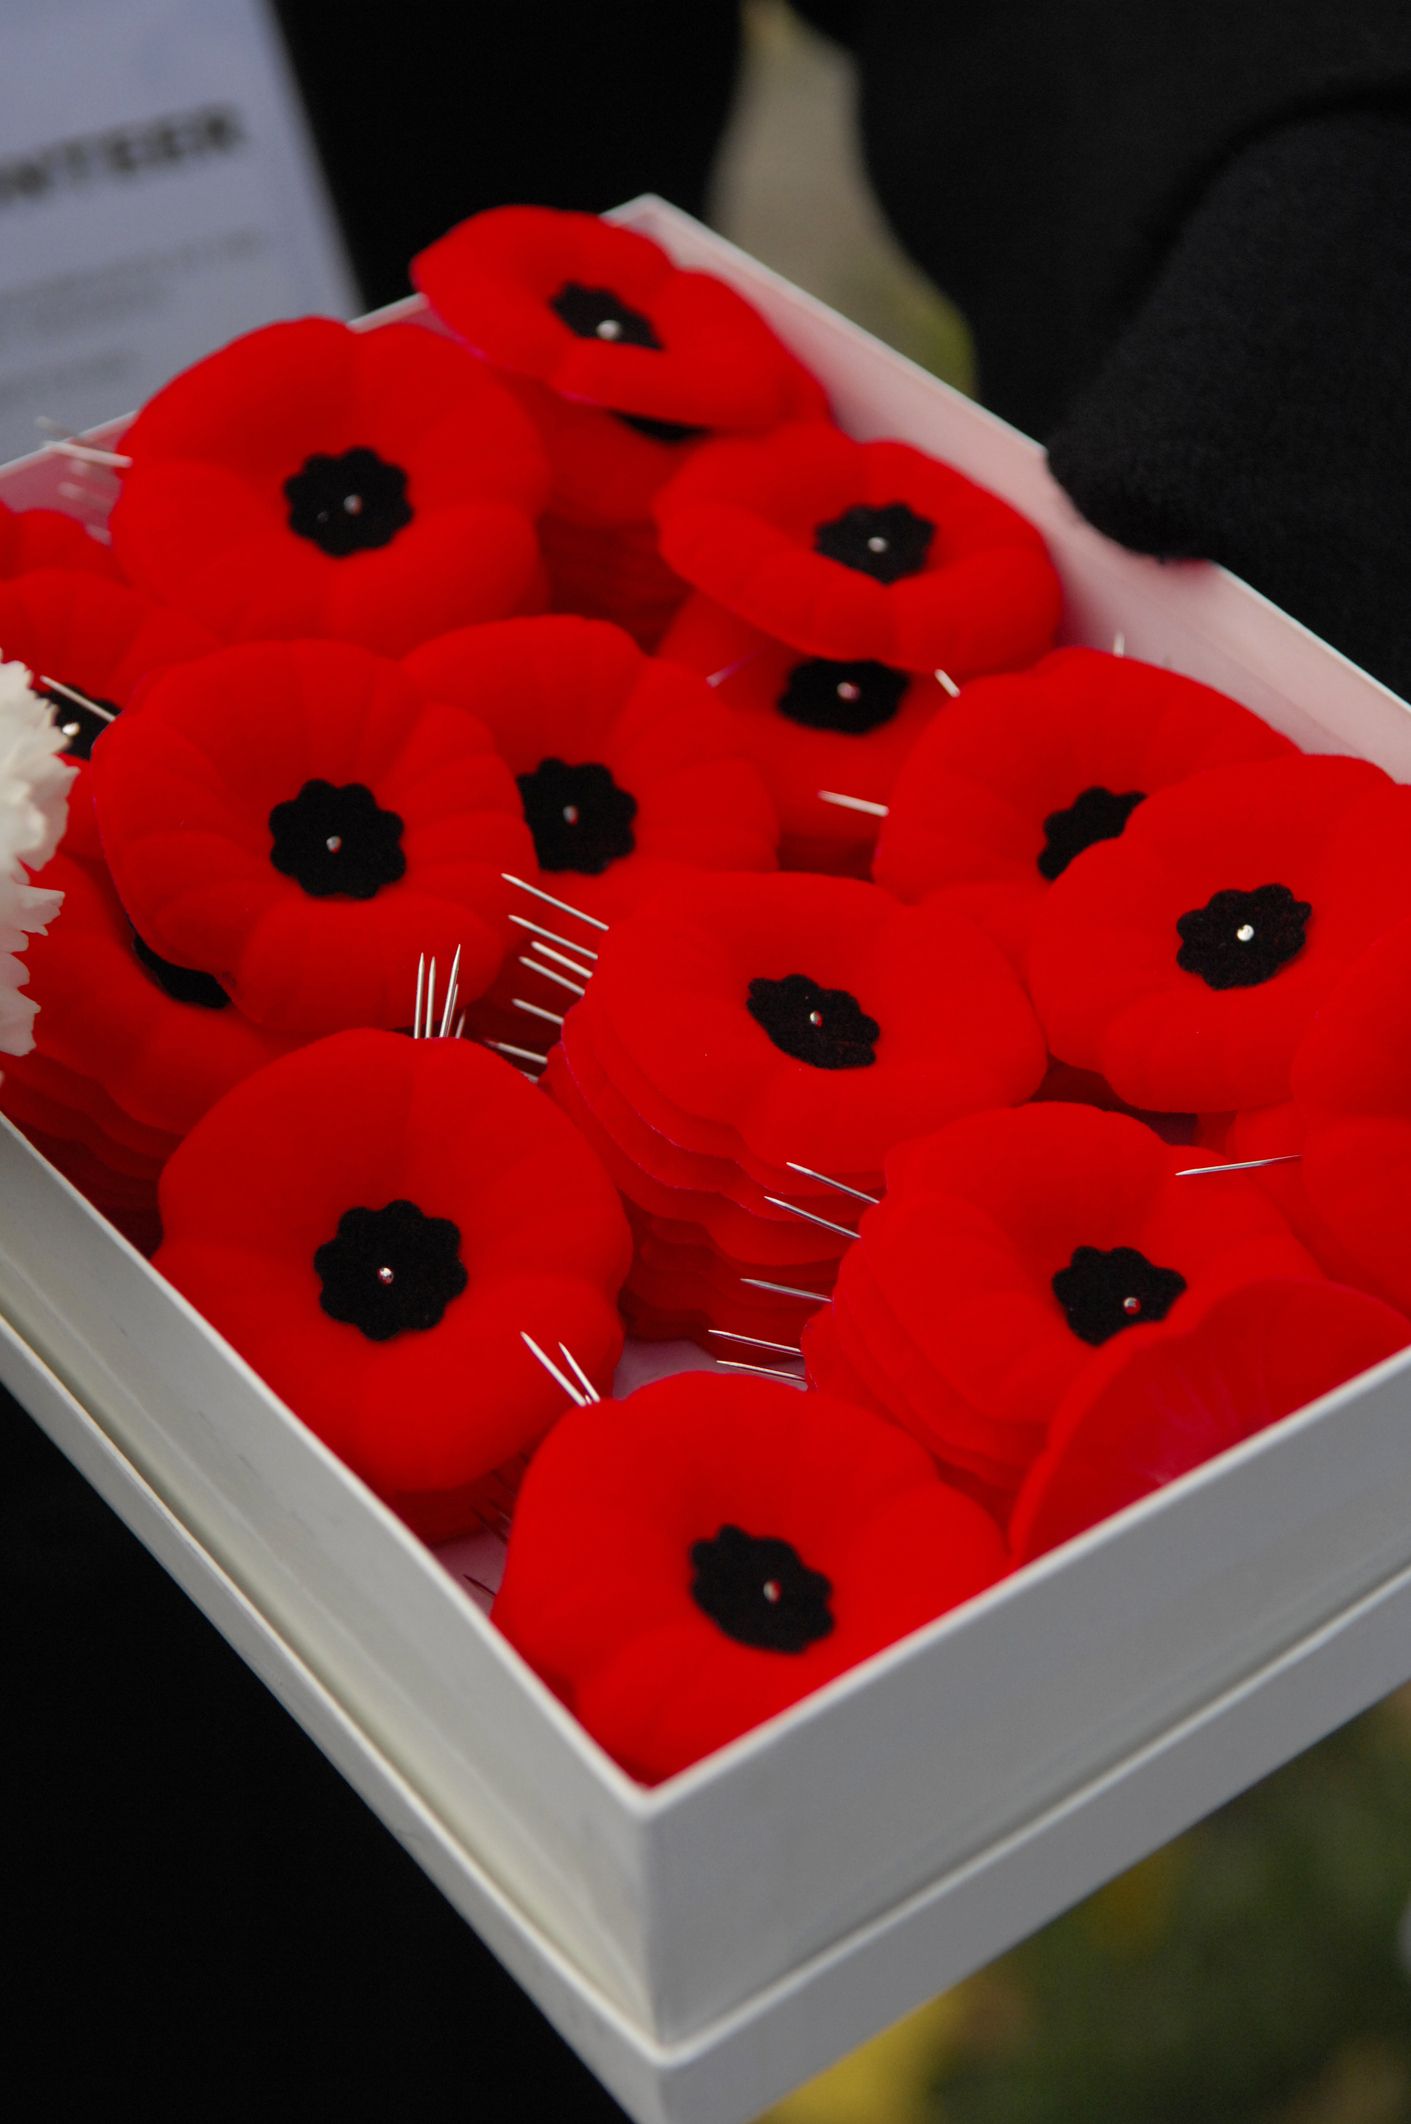 Red Poppy Flowers: Learn About Red Poppy History